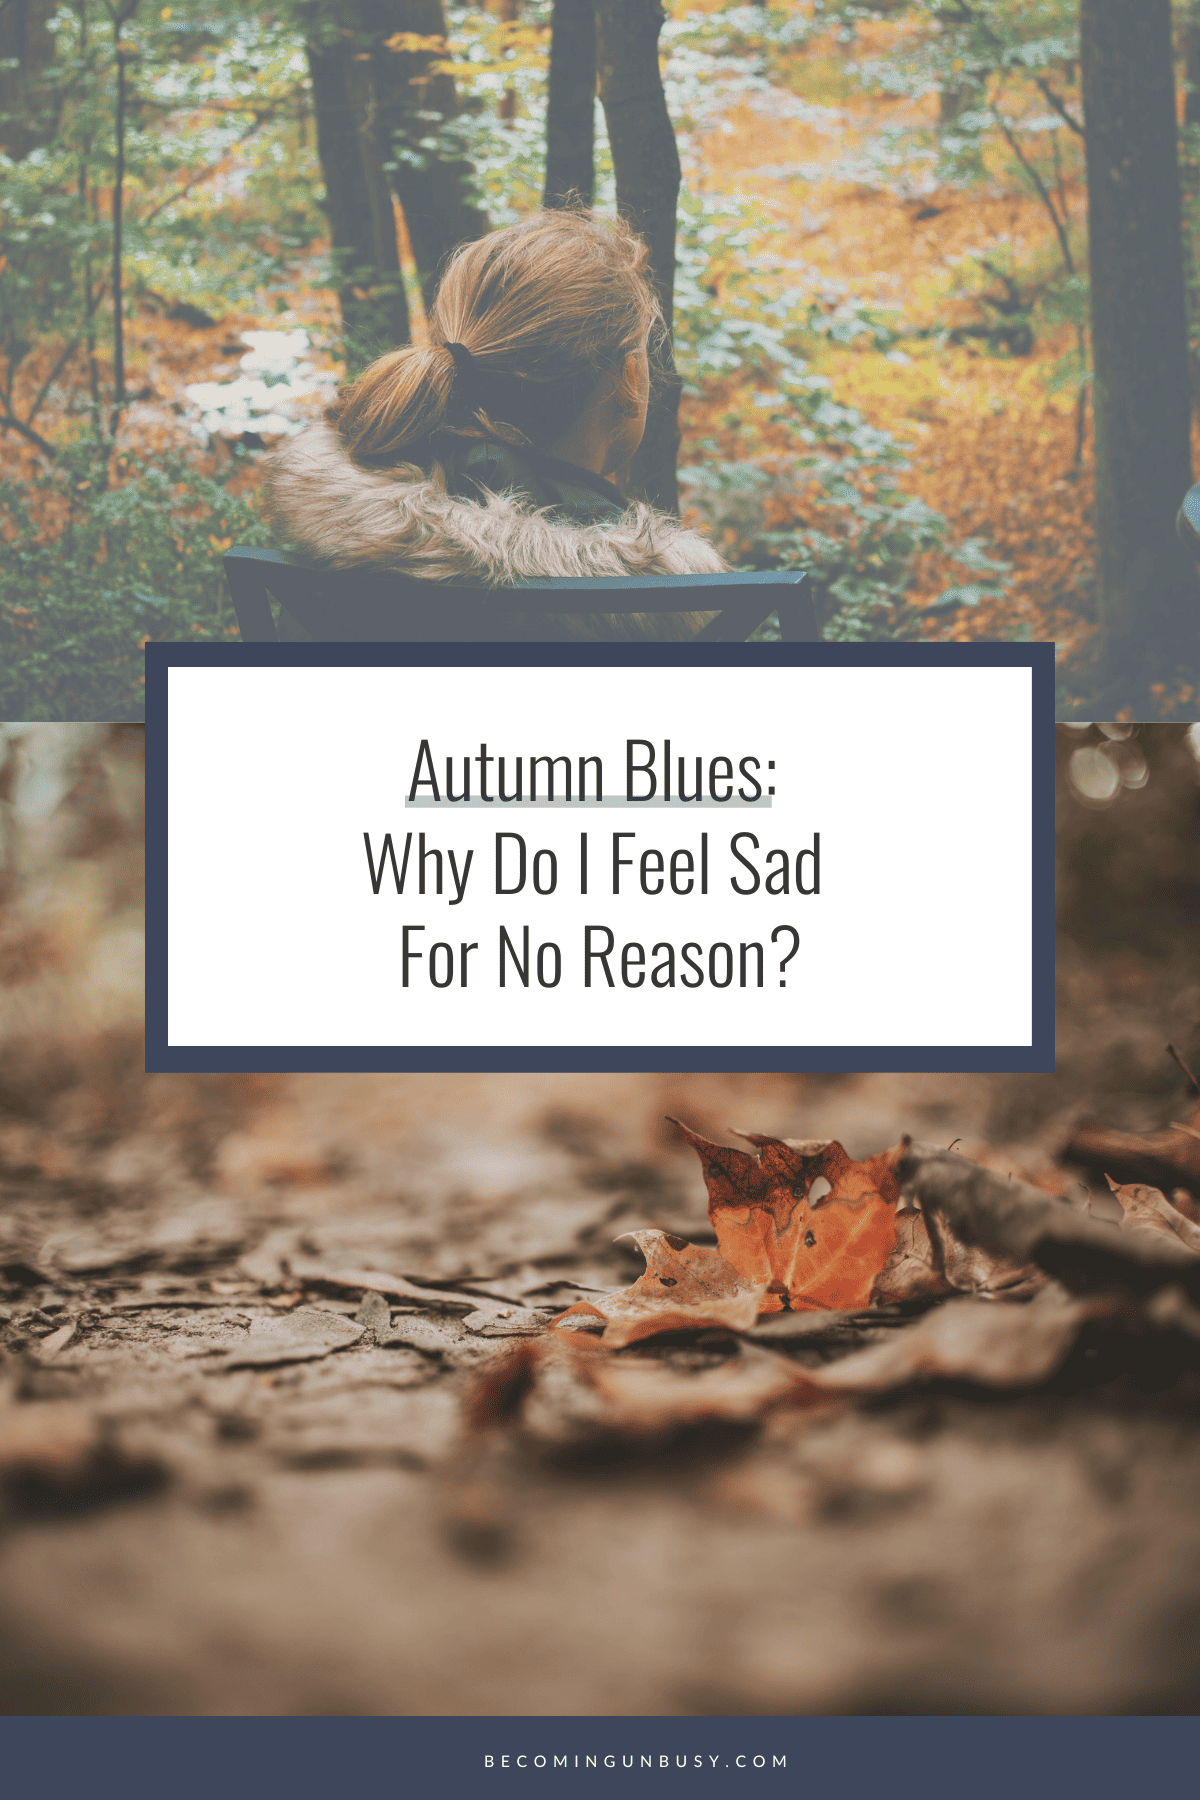 A headline collage for pinning on Pinterest that includes a photo of a woman struggling with Autumn Blues sitting on a chair outside and a photo of a fallen leaf on a forest floor.